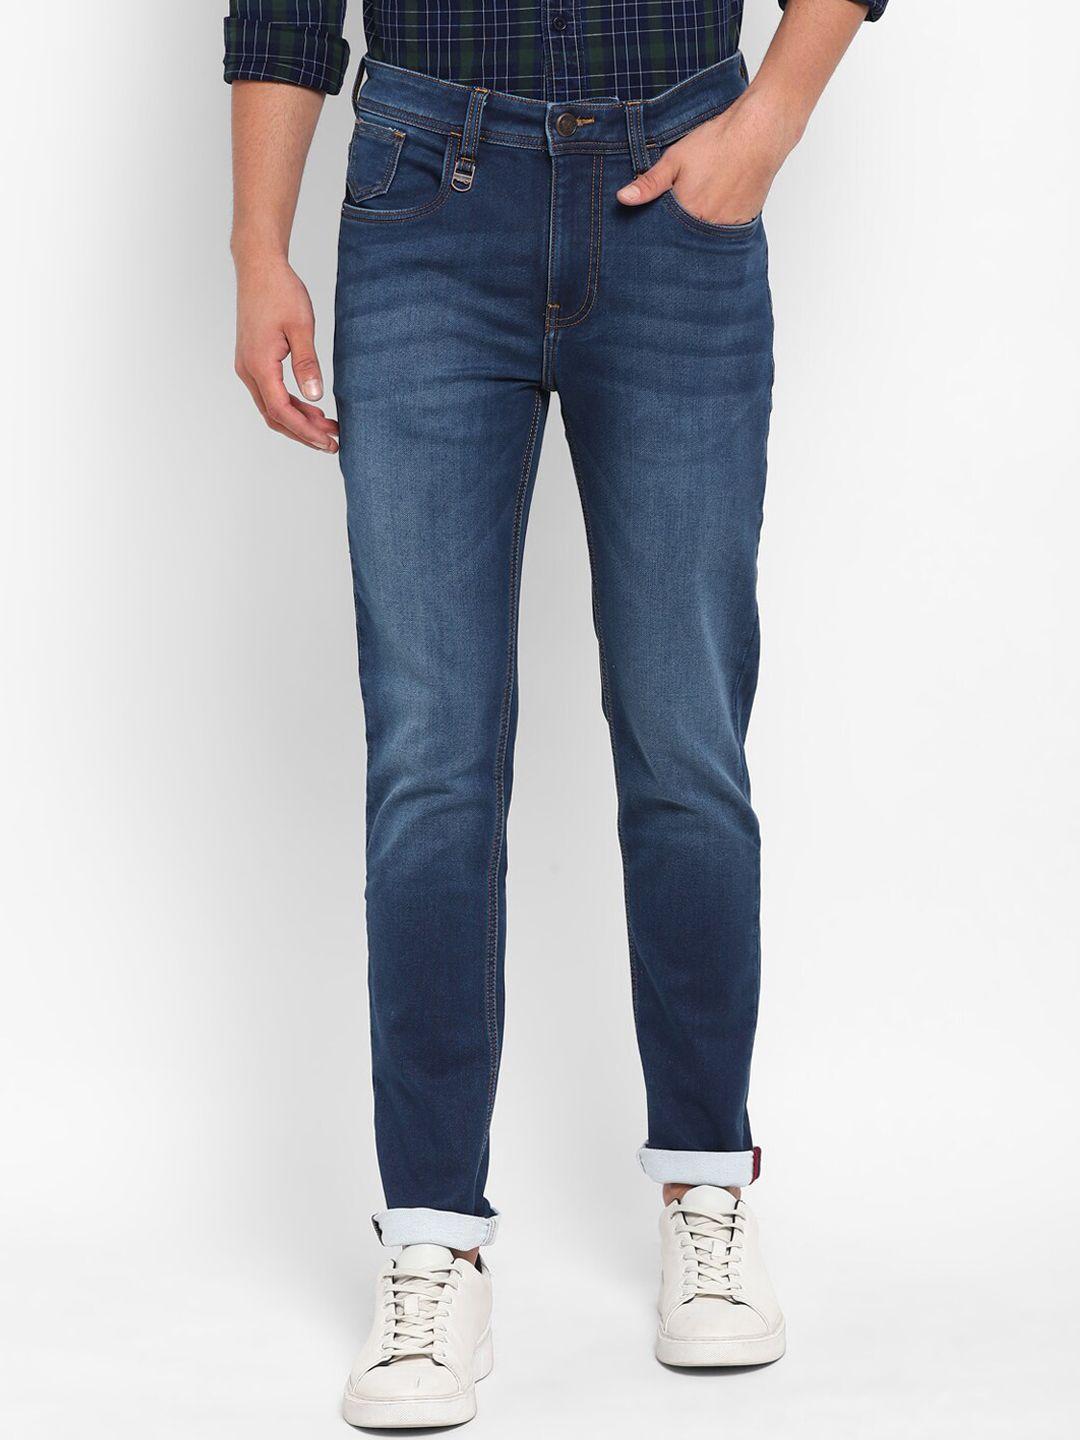 red-chief-men-blue-slim-fit-heavy-fade-jeans